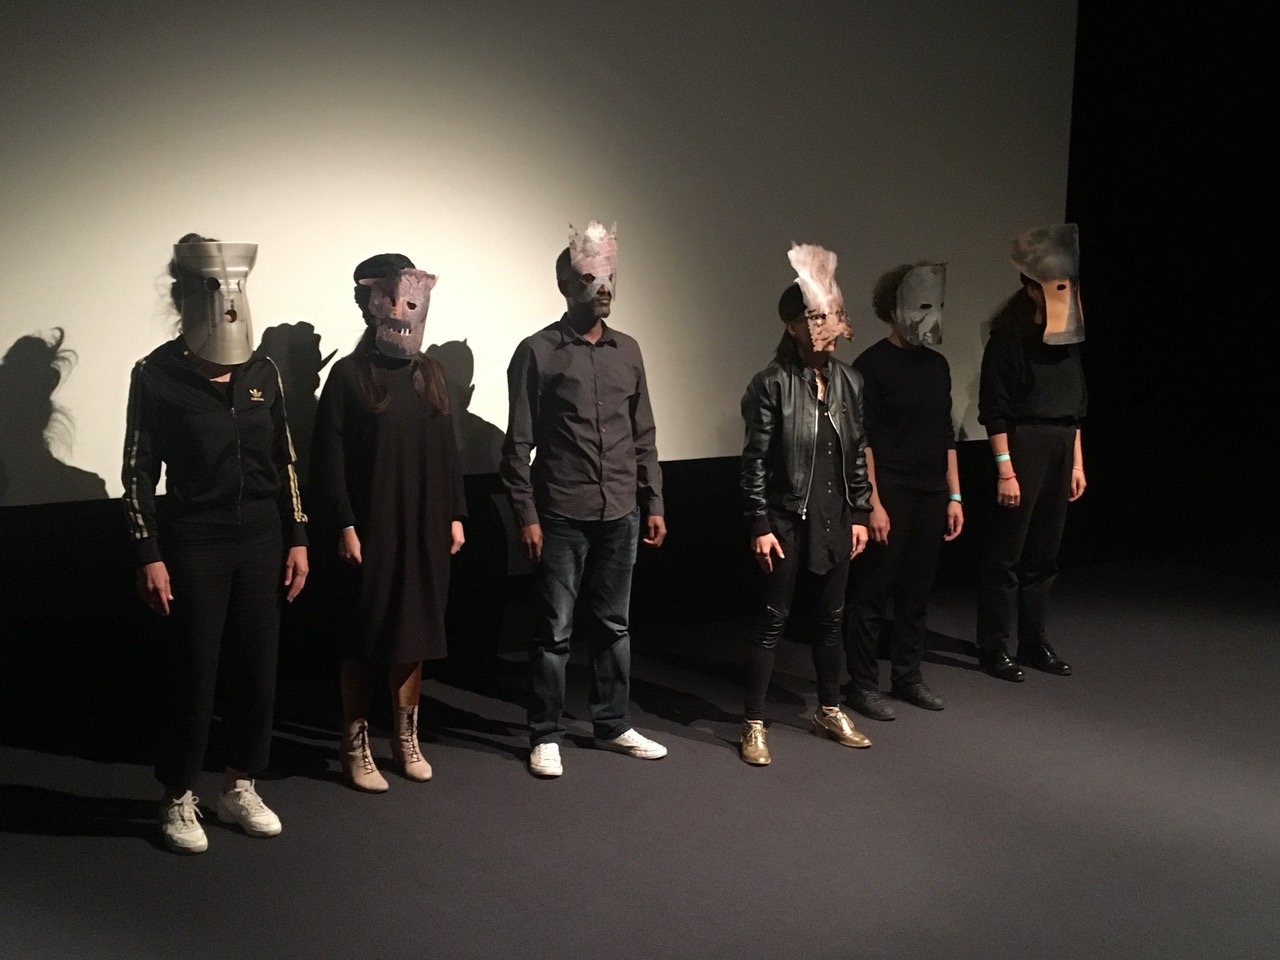 6 people in dark clothes with masks lined up in a row